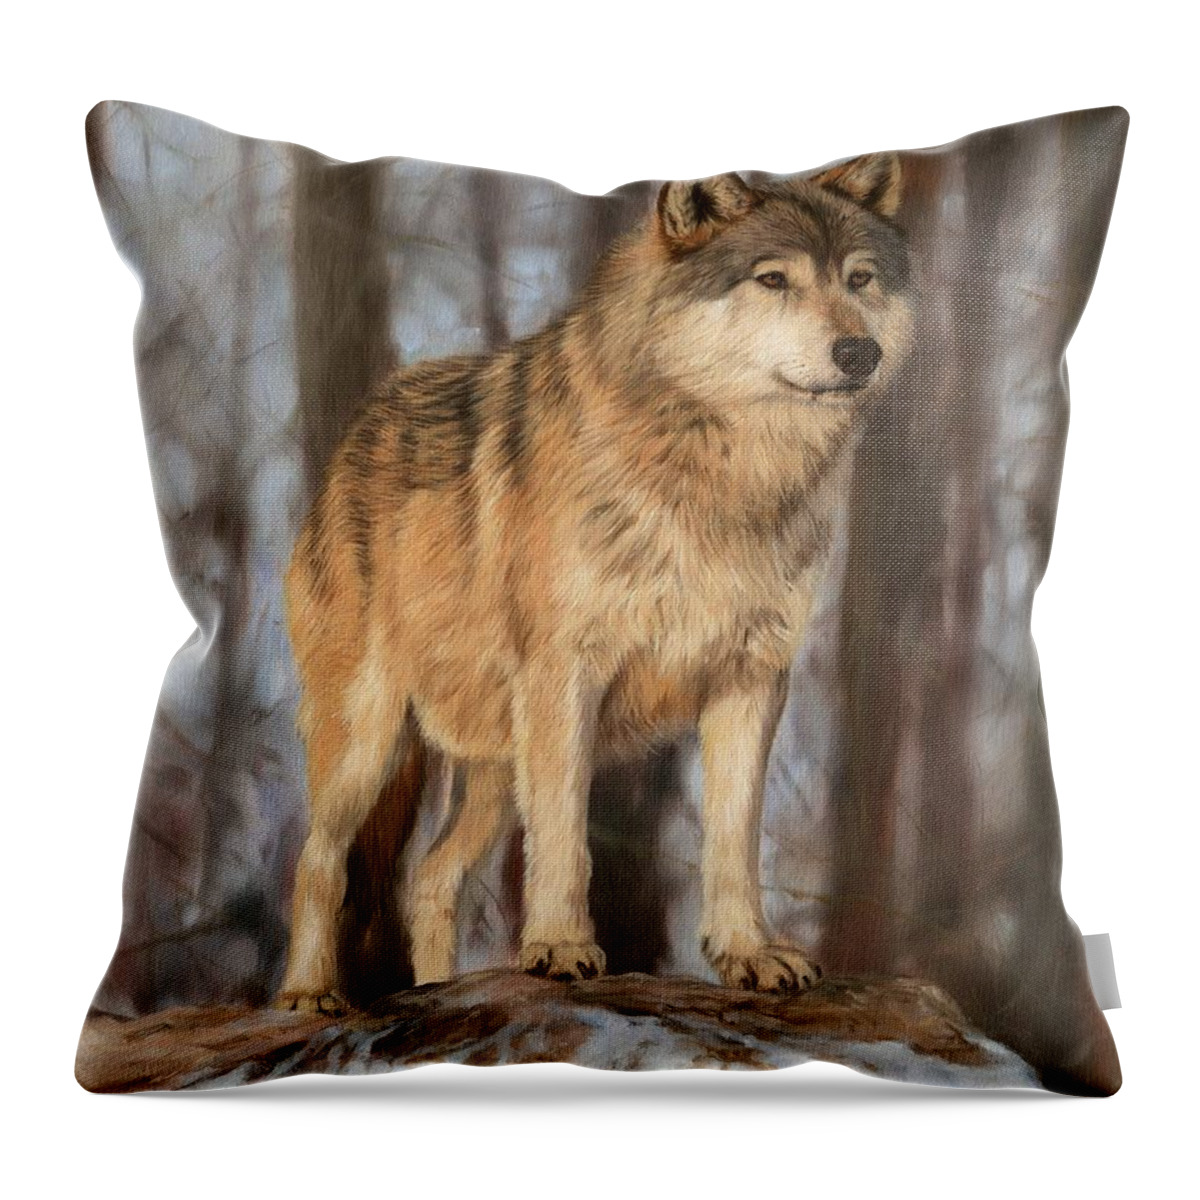 Wolf Throw Pillow featuring the painting Grey Wolf by David Stribbling